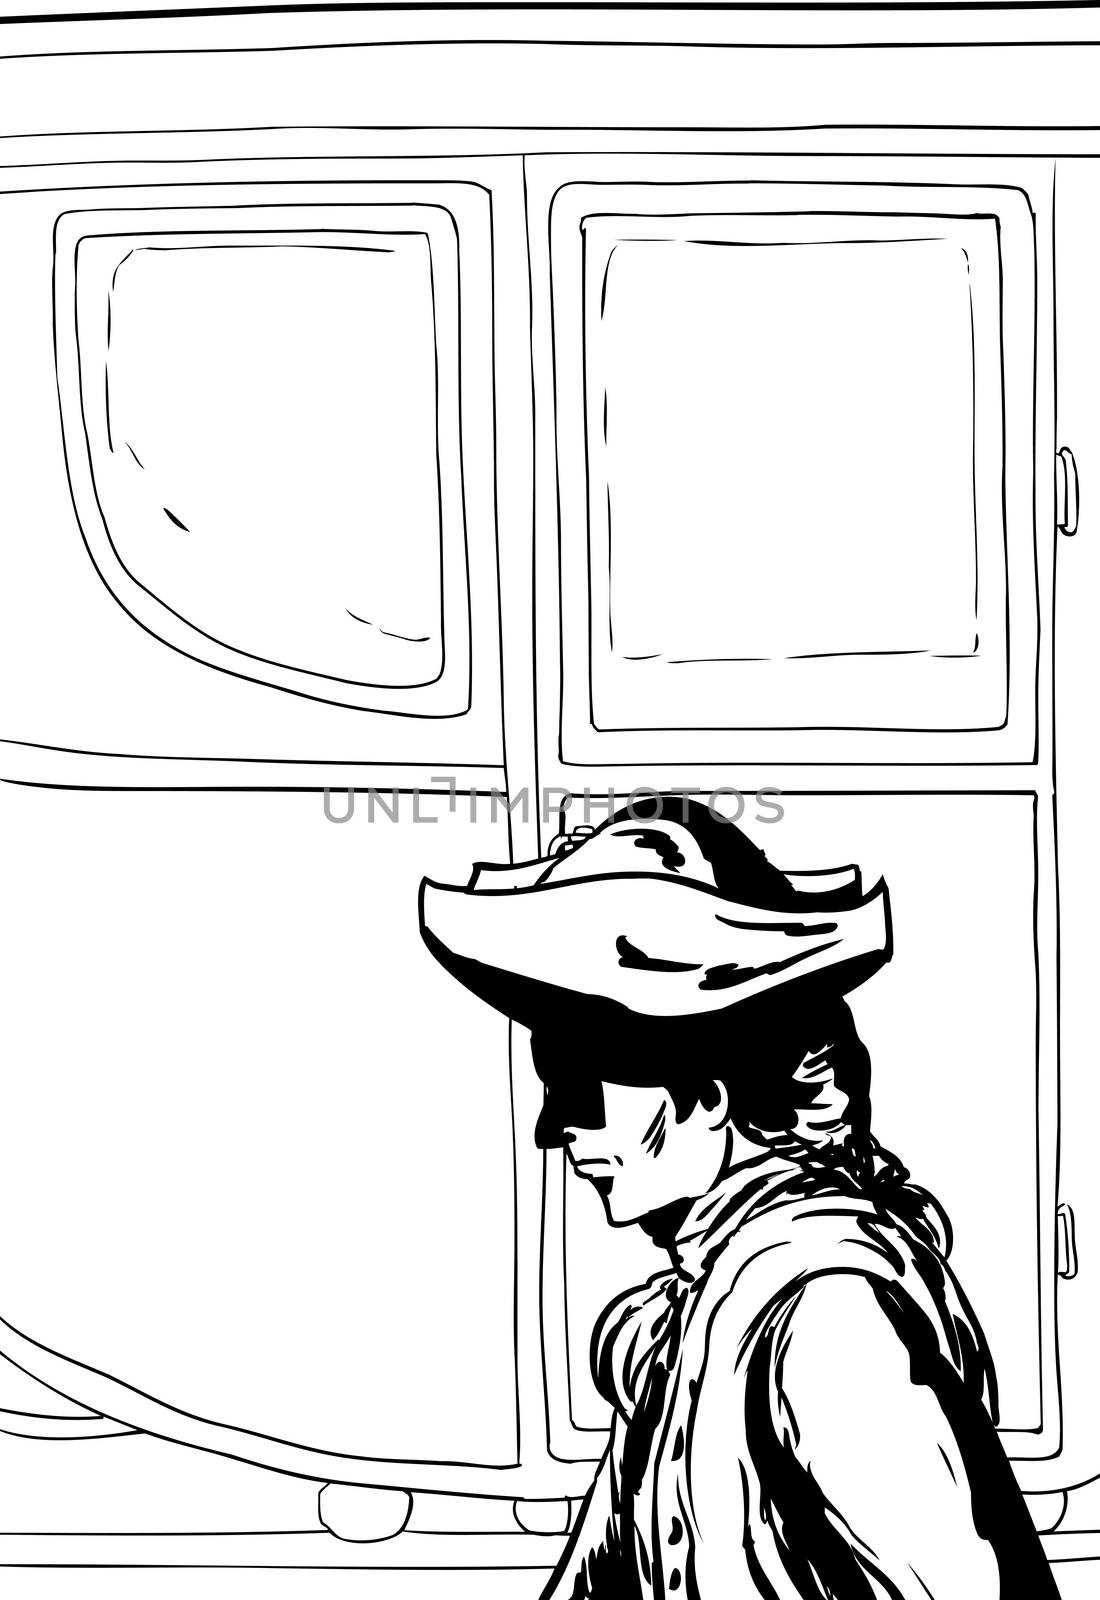 Outlined side view of 18th century man in hat walking past fancy empty buggy